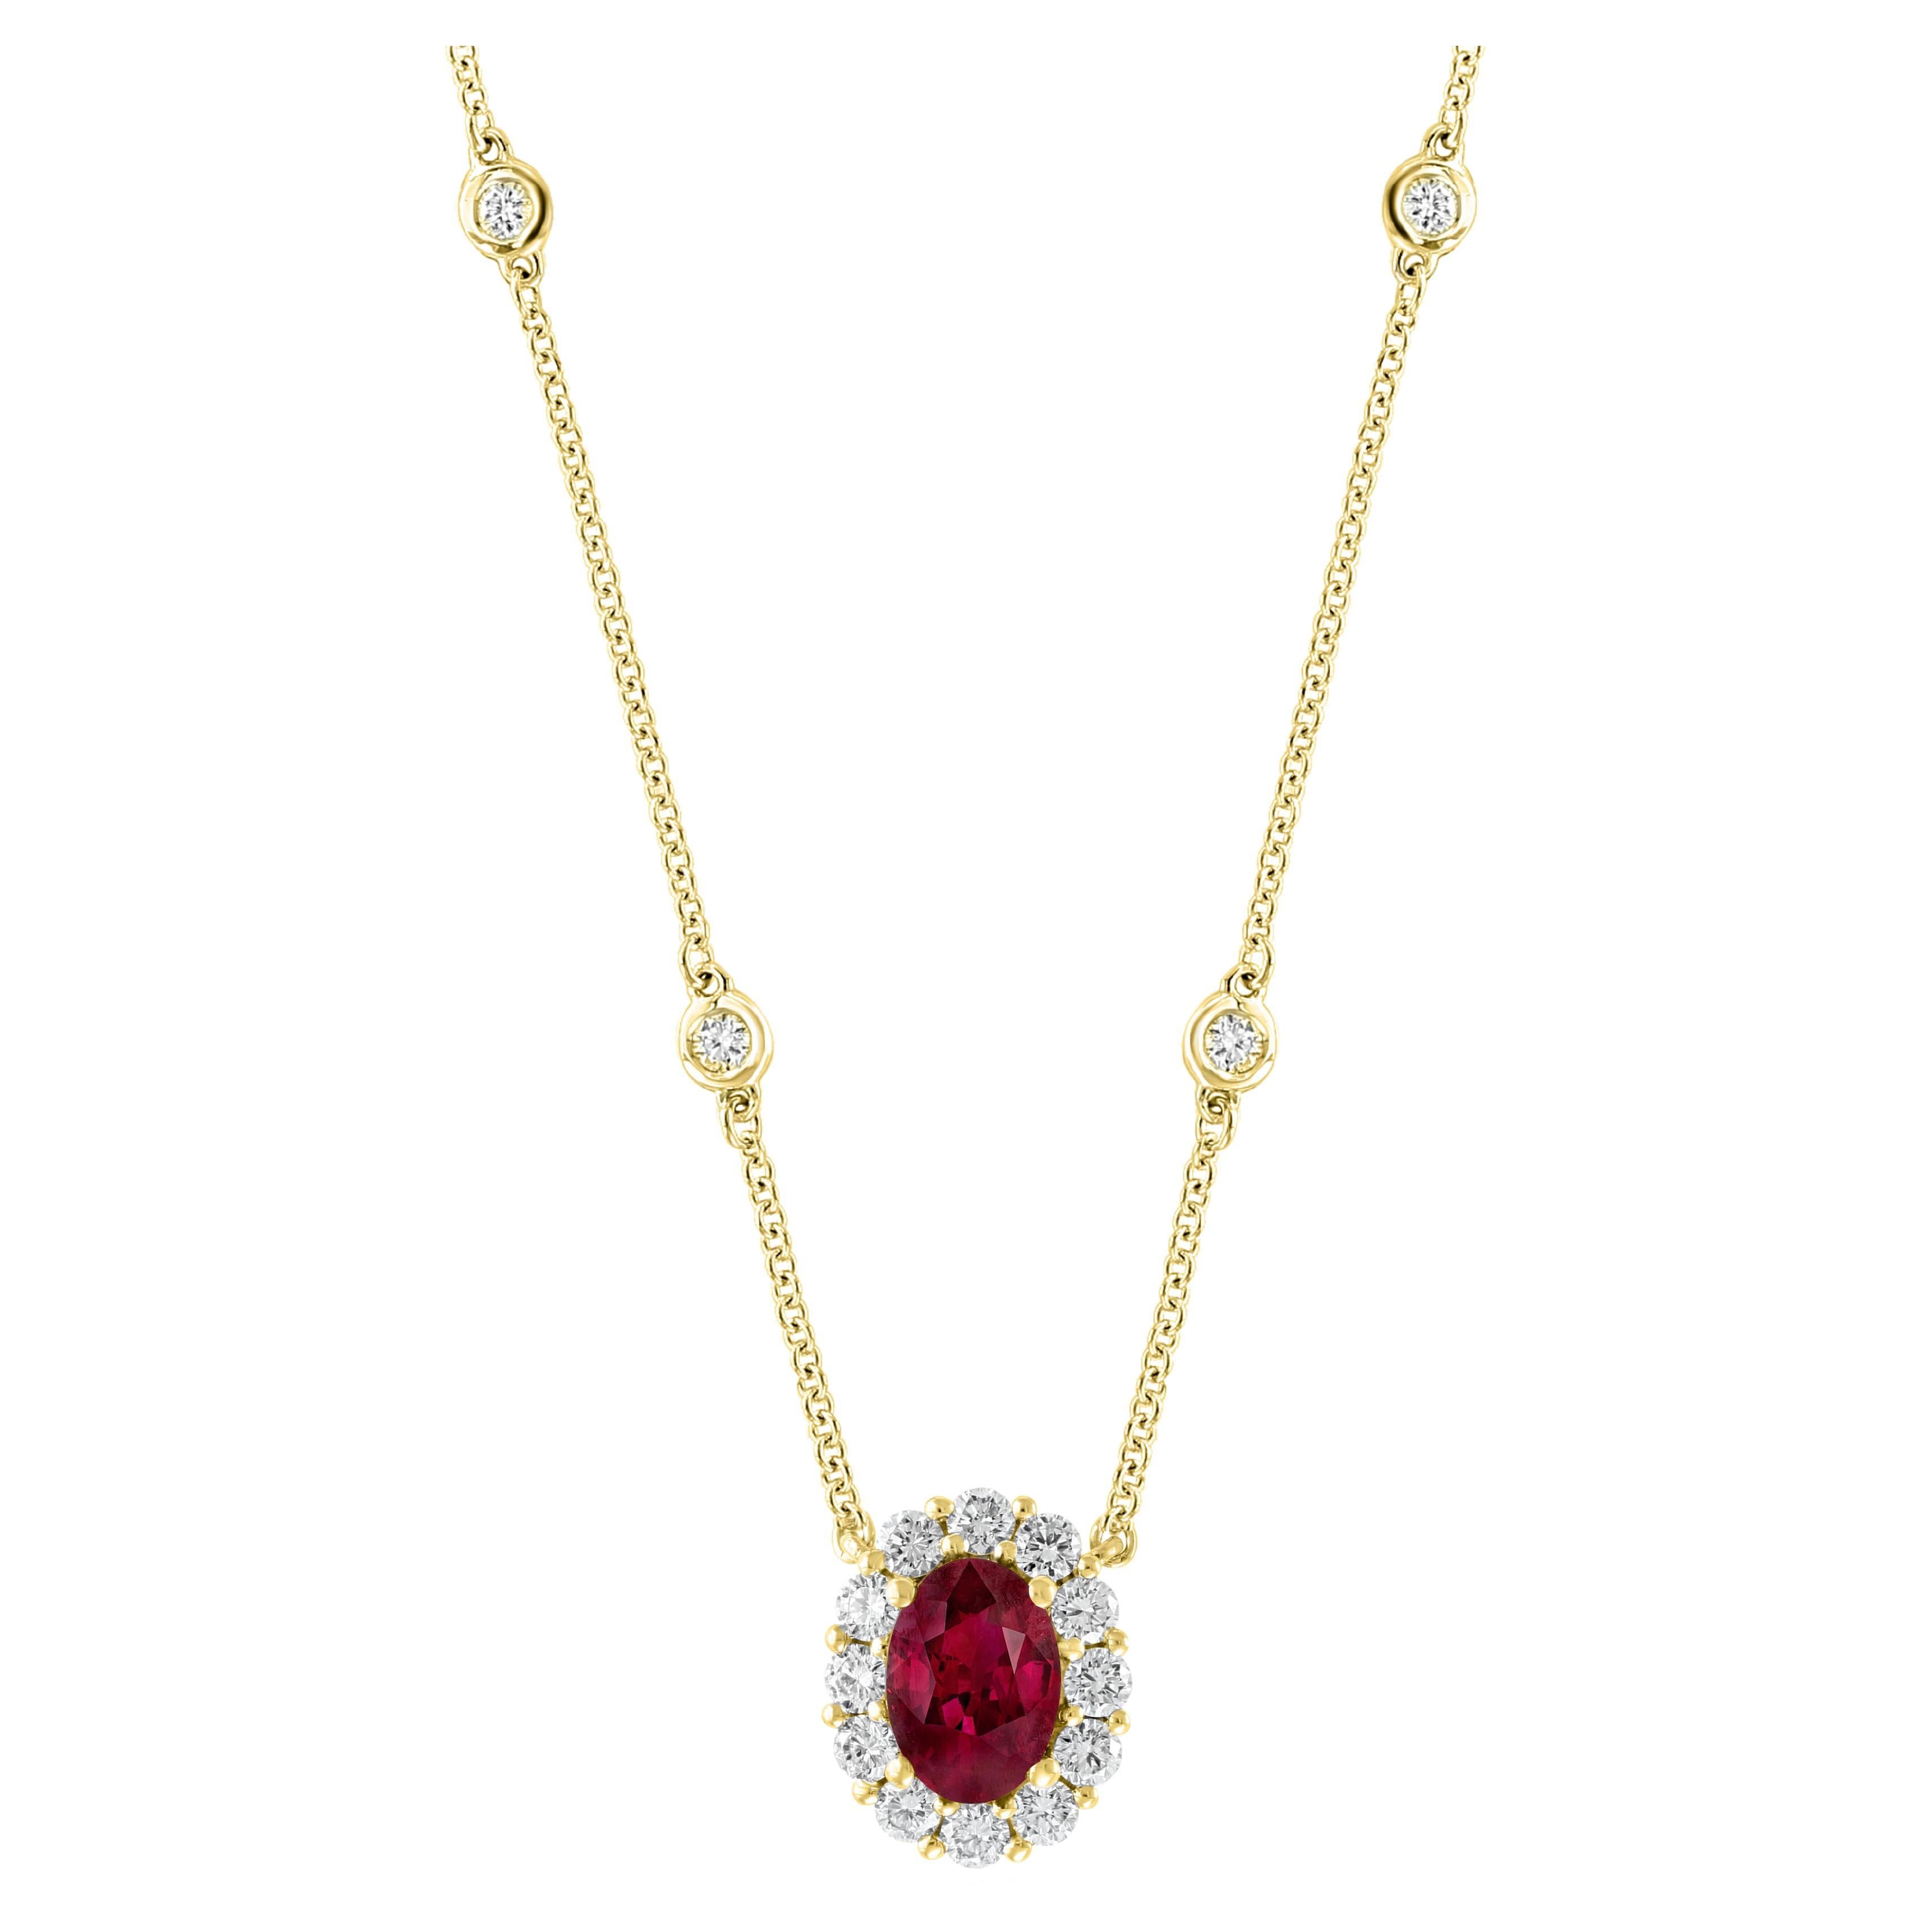 0.71 Carat Oval Cut Ruby and Diamond Pendant Necklace in 14K Yellow Gold